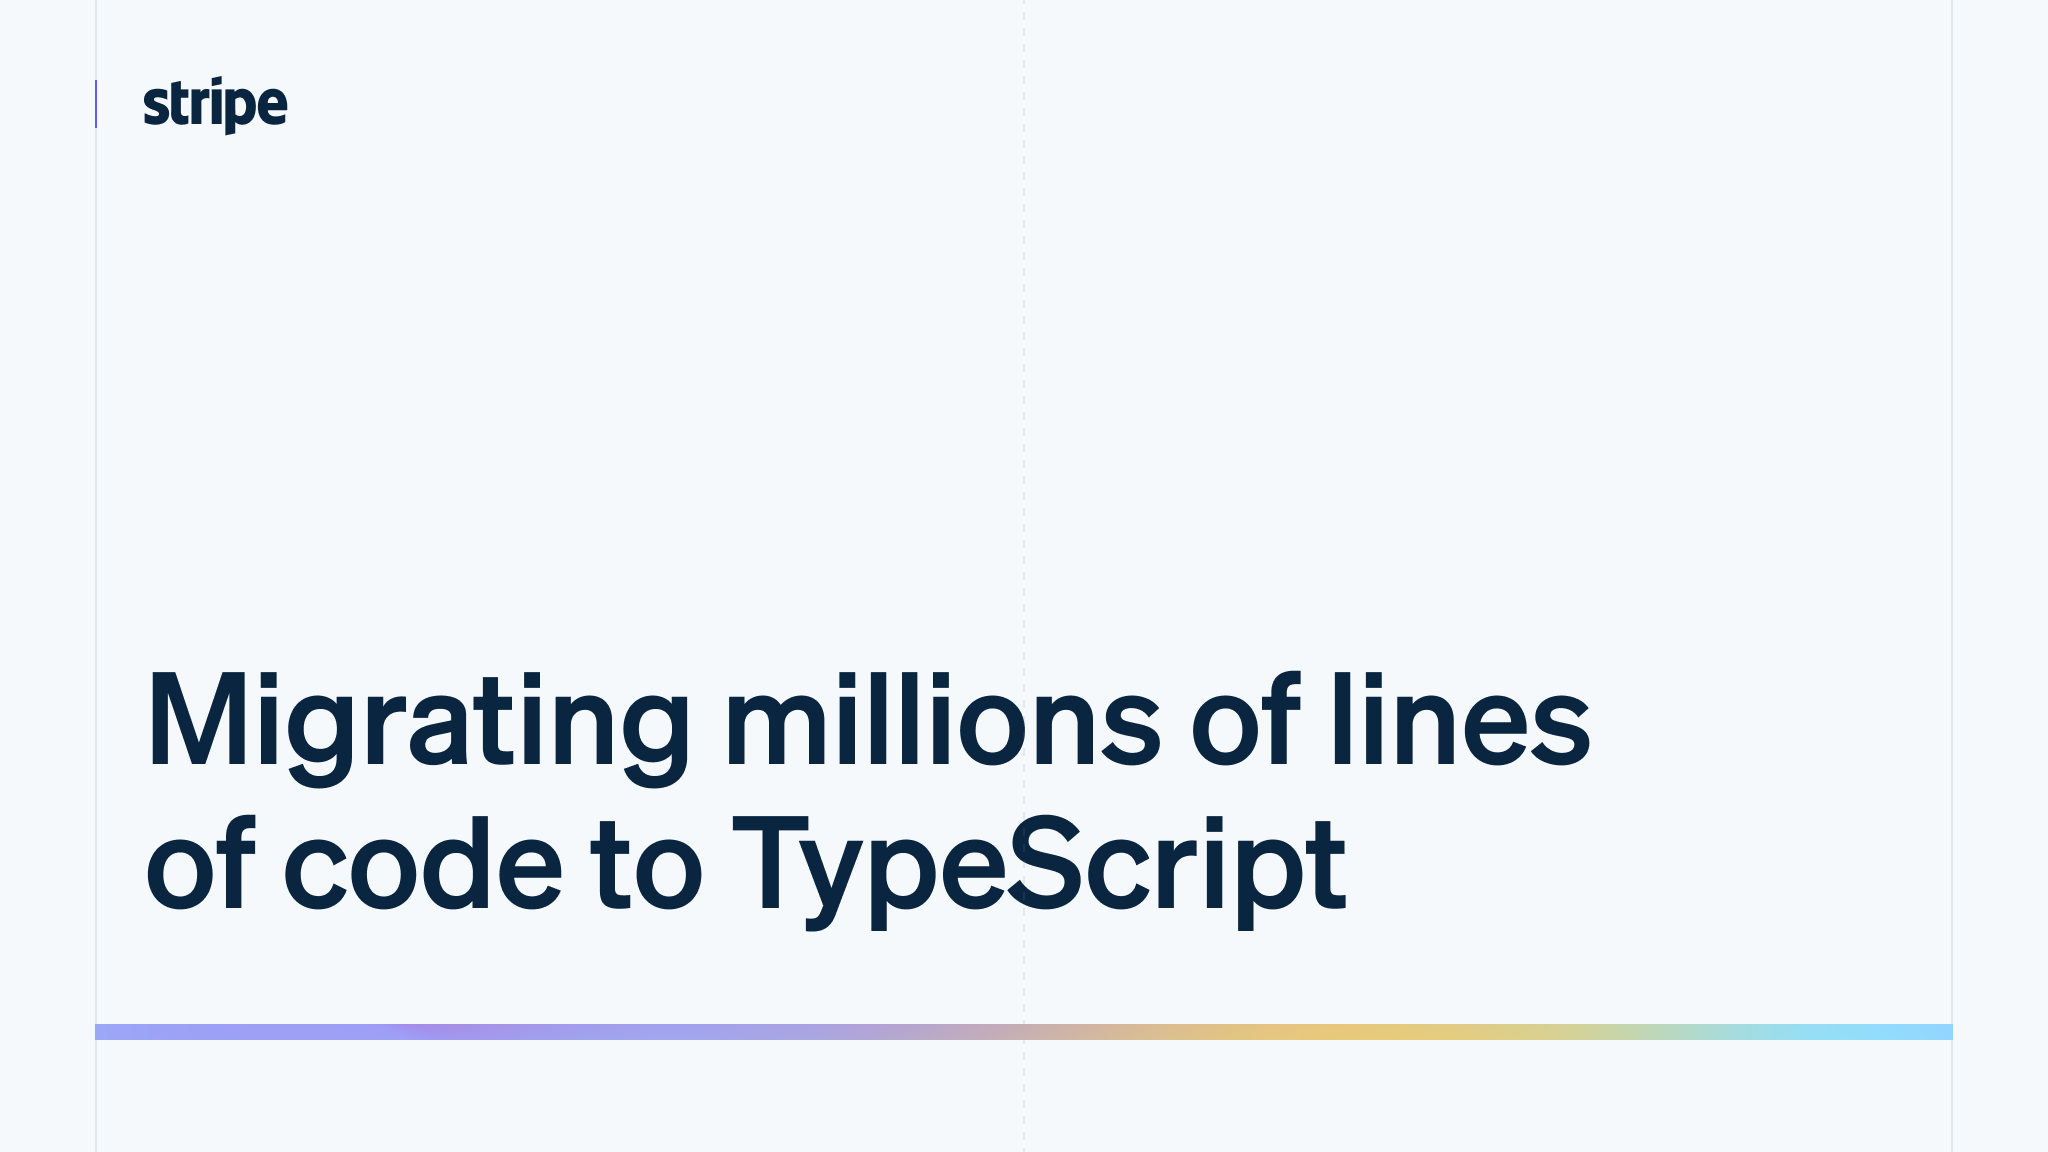 On Sunday March 6, we migrated Stripe’s largest JavaScript codebase (powering the Stripe Dashboard) from Flow to TypeScript. In a single pull reques